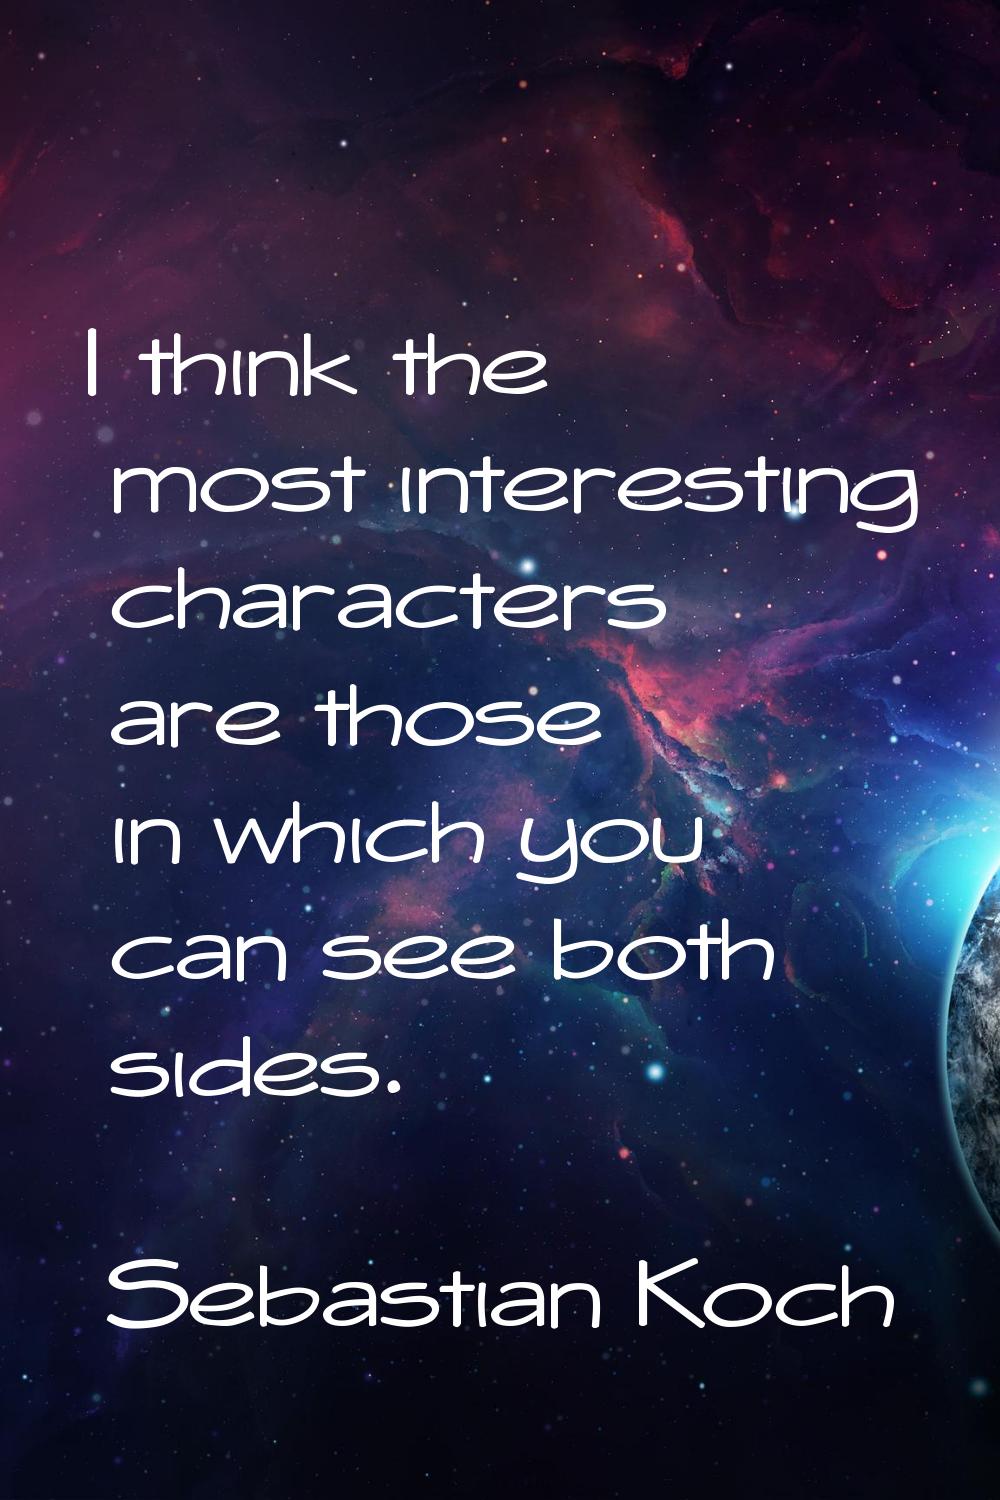 I think the most interesting characters are those in which you can see both sides.